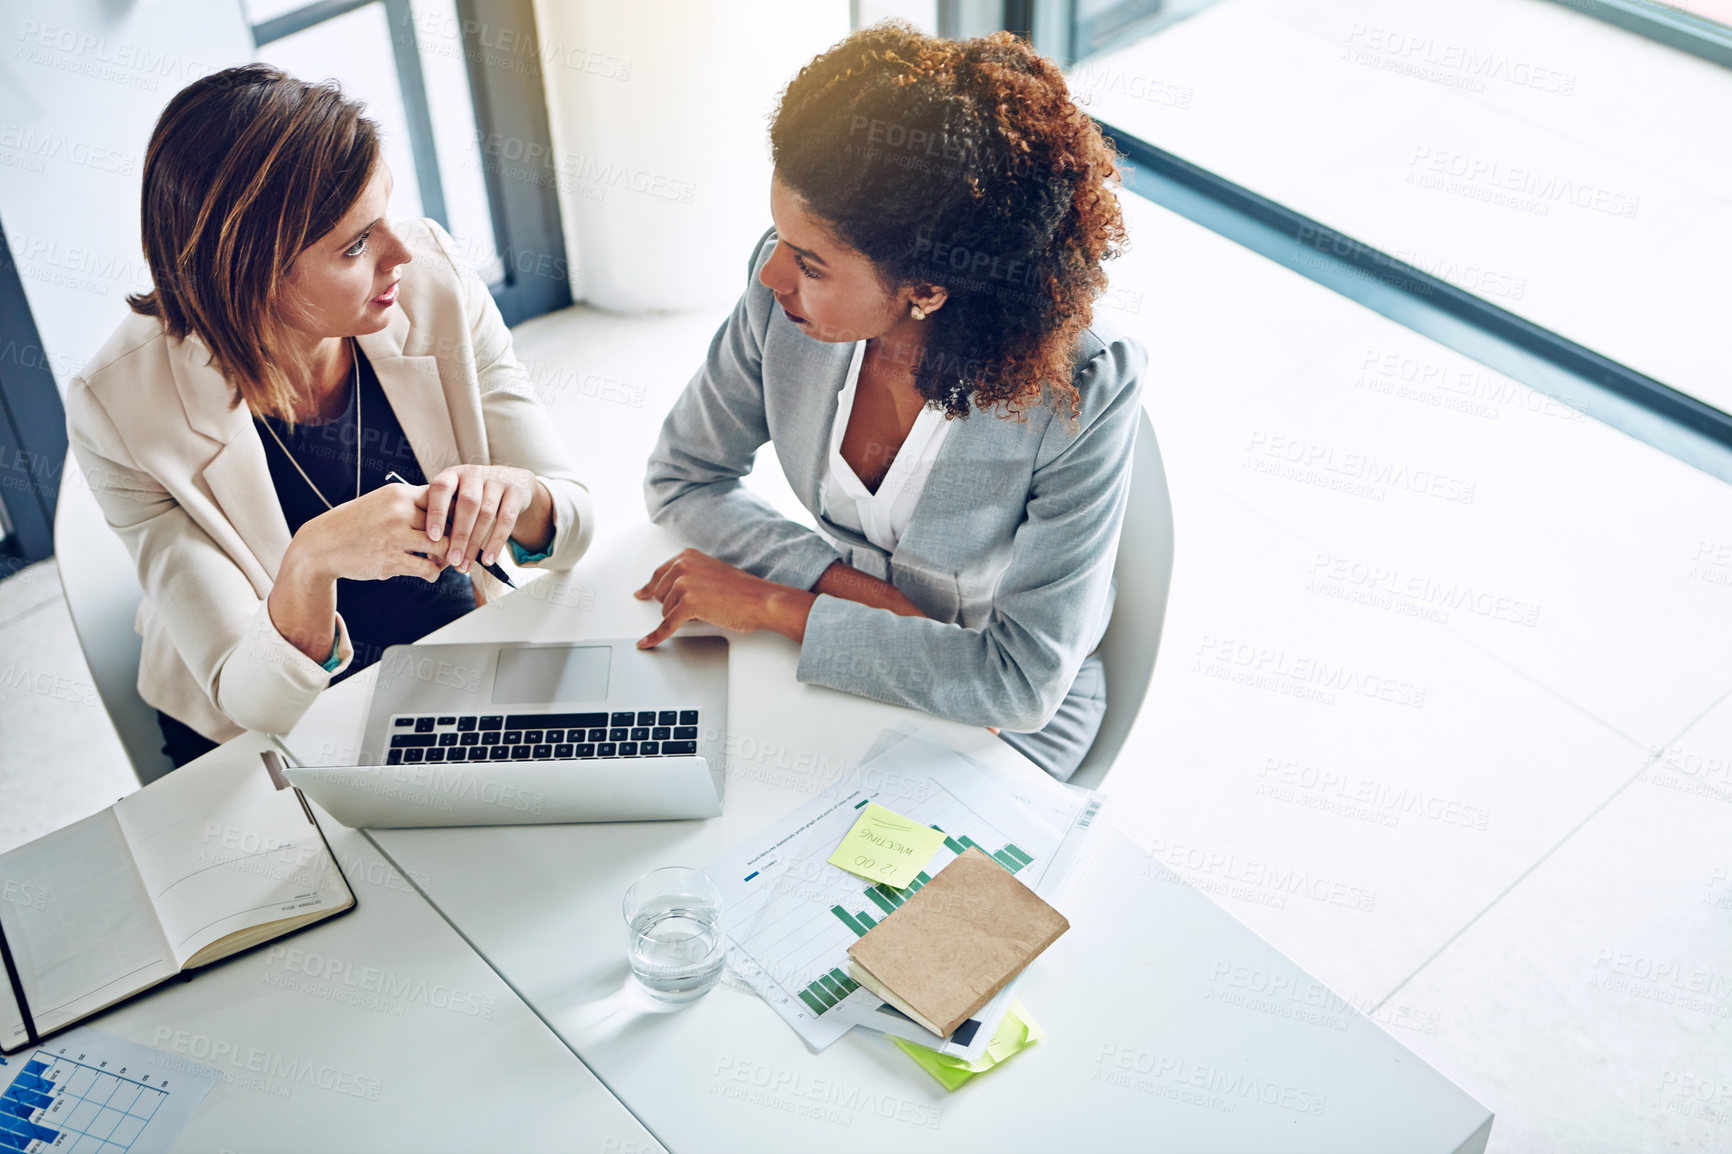 Buy stock photo Cropped shot of two corporate businesswomen working together on a laptop in an office